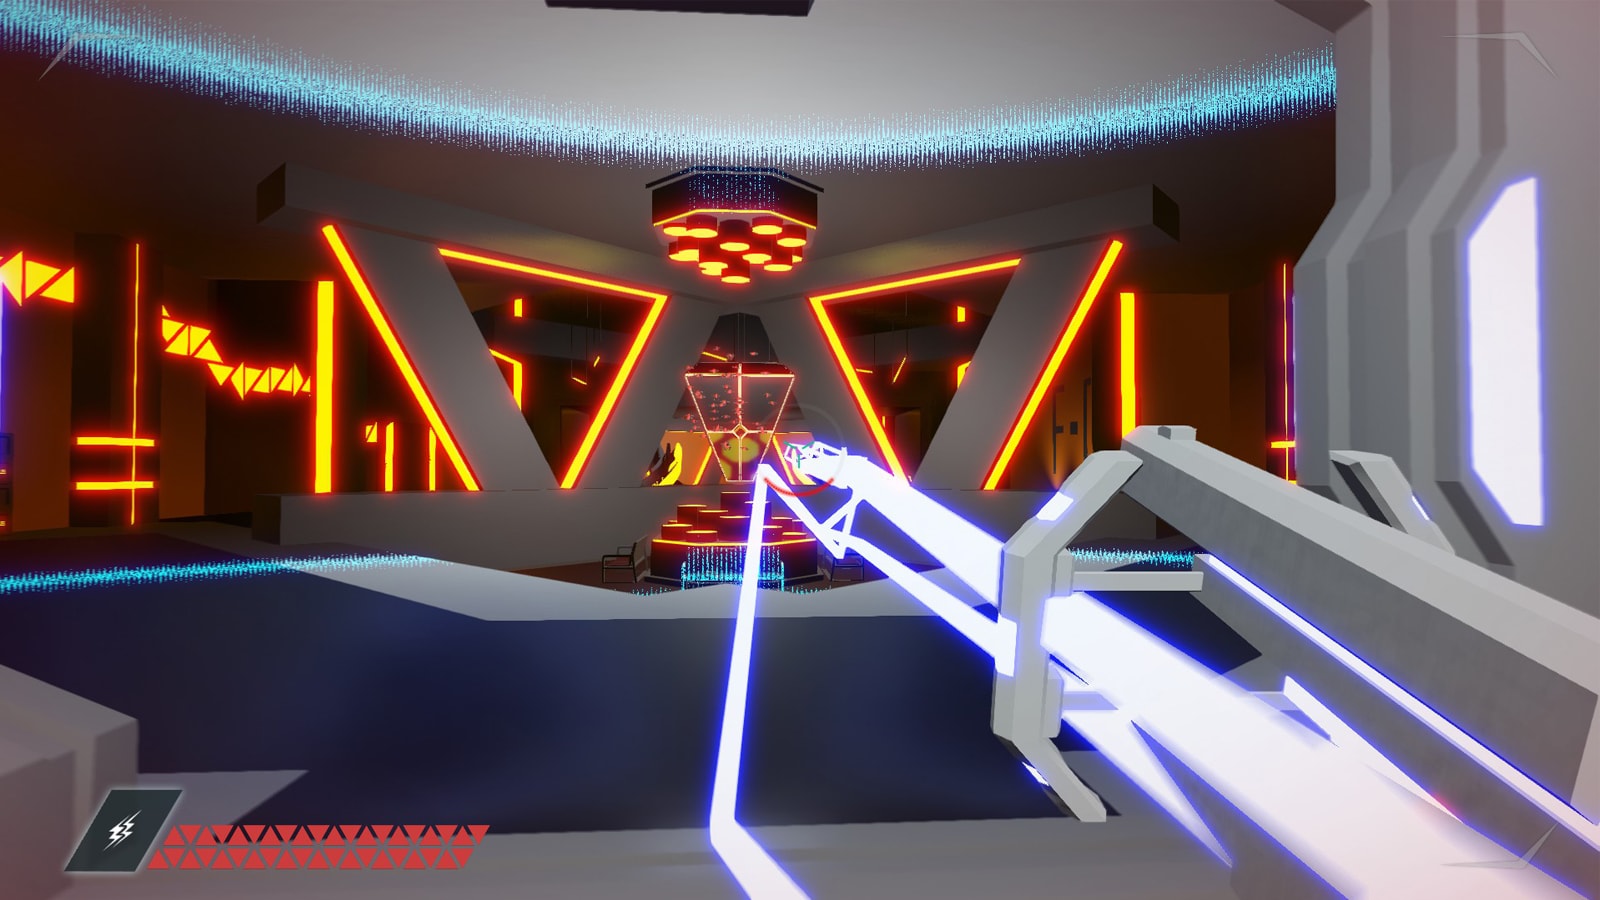 The player shoots a blue beam from their grey gun at a triangular opening in a futuristic interior. 